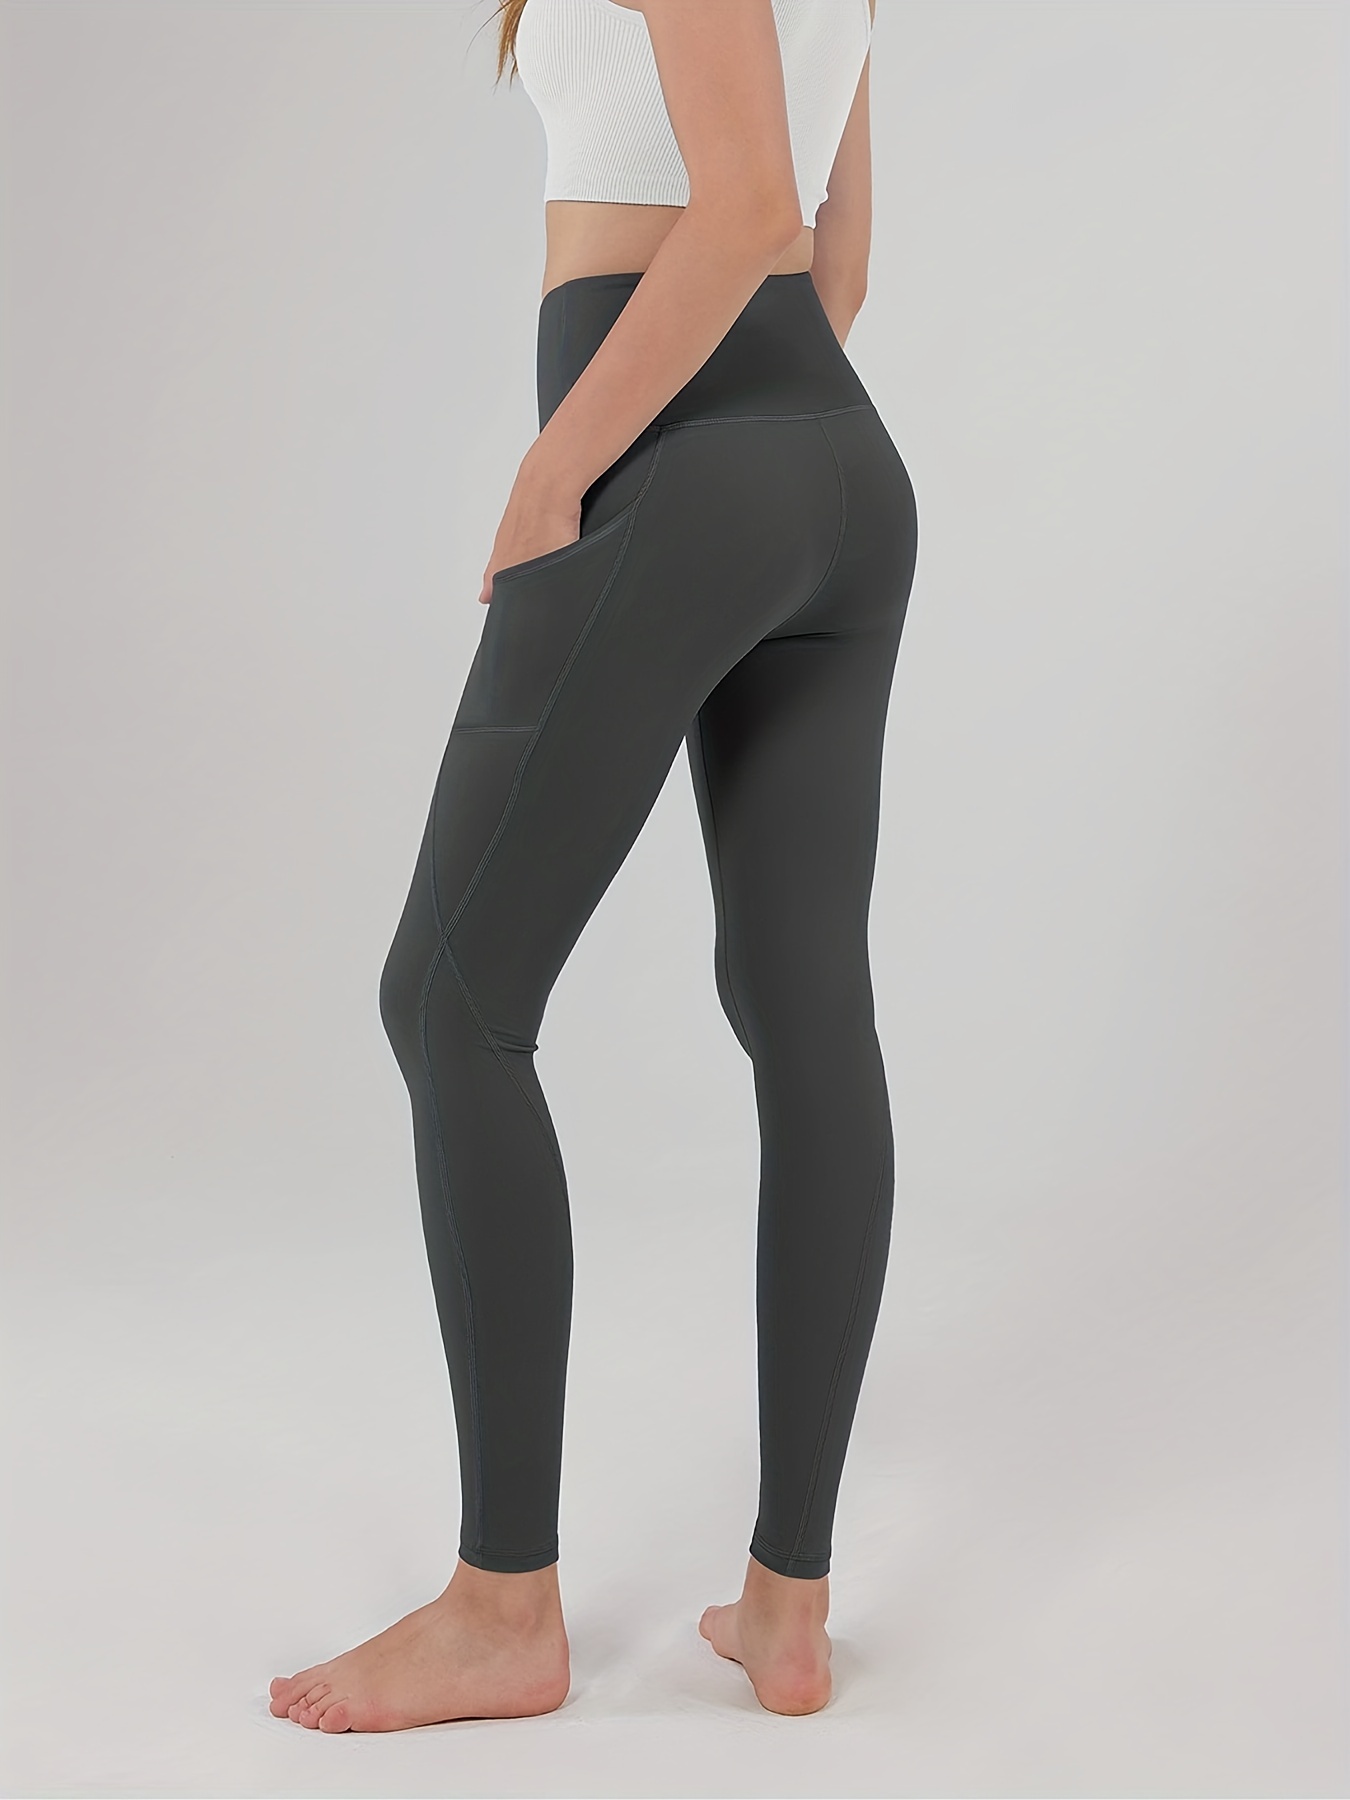 Classic Womens Yoga Pants With Pockets Leggings Mini Pockets High Waist  Tummy Control Non See Through Workout From Lucky_lulu1222, $16.07